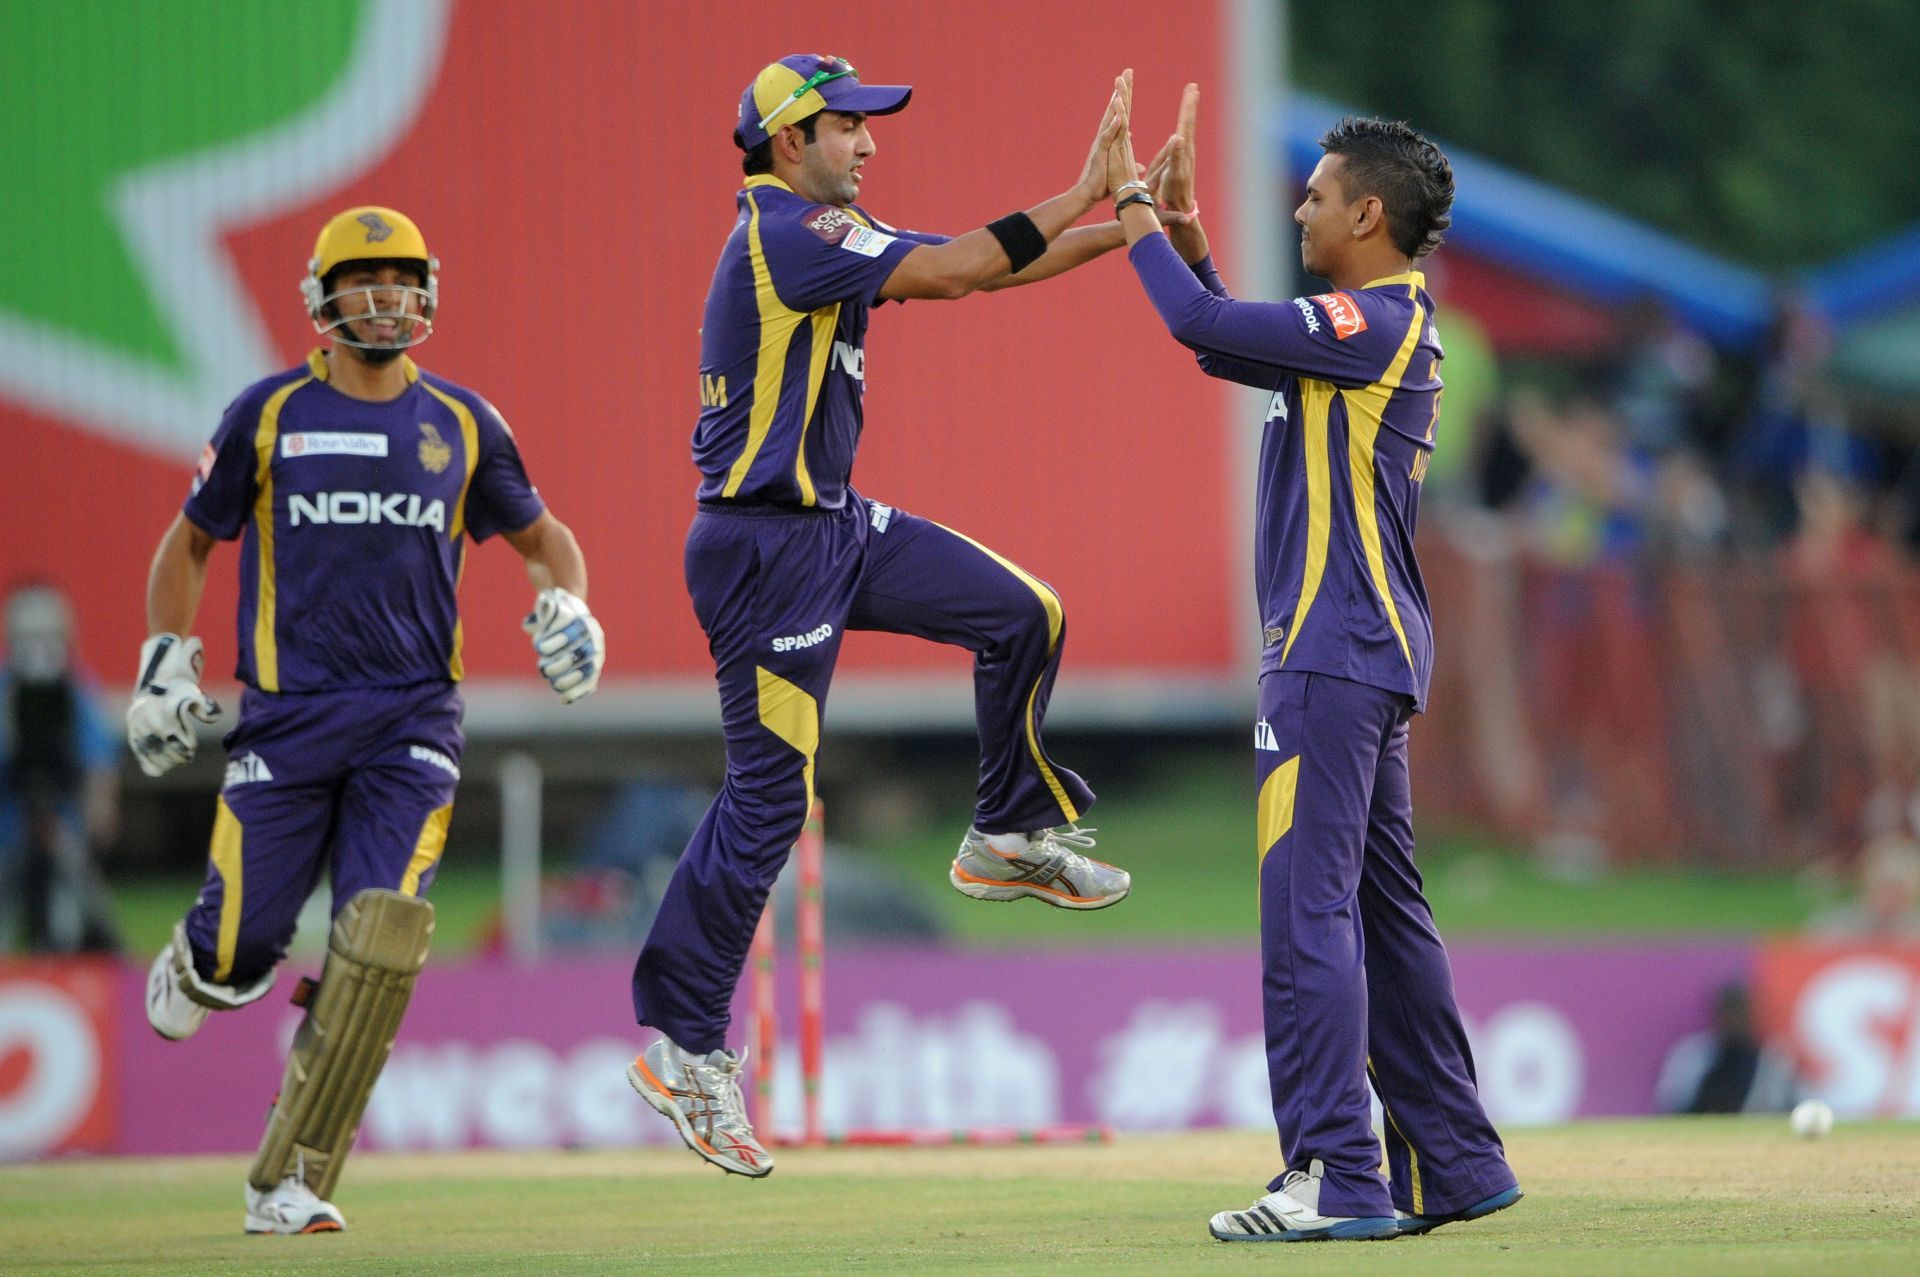 KKR emerged with a whole new look after the 2011 auction